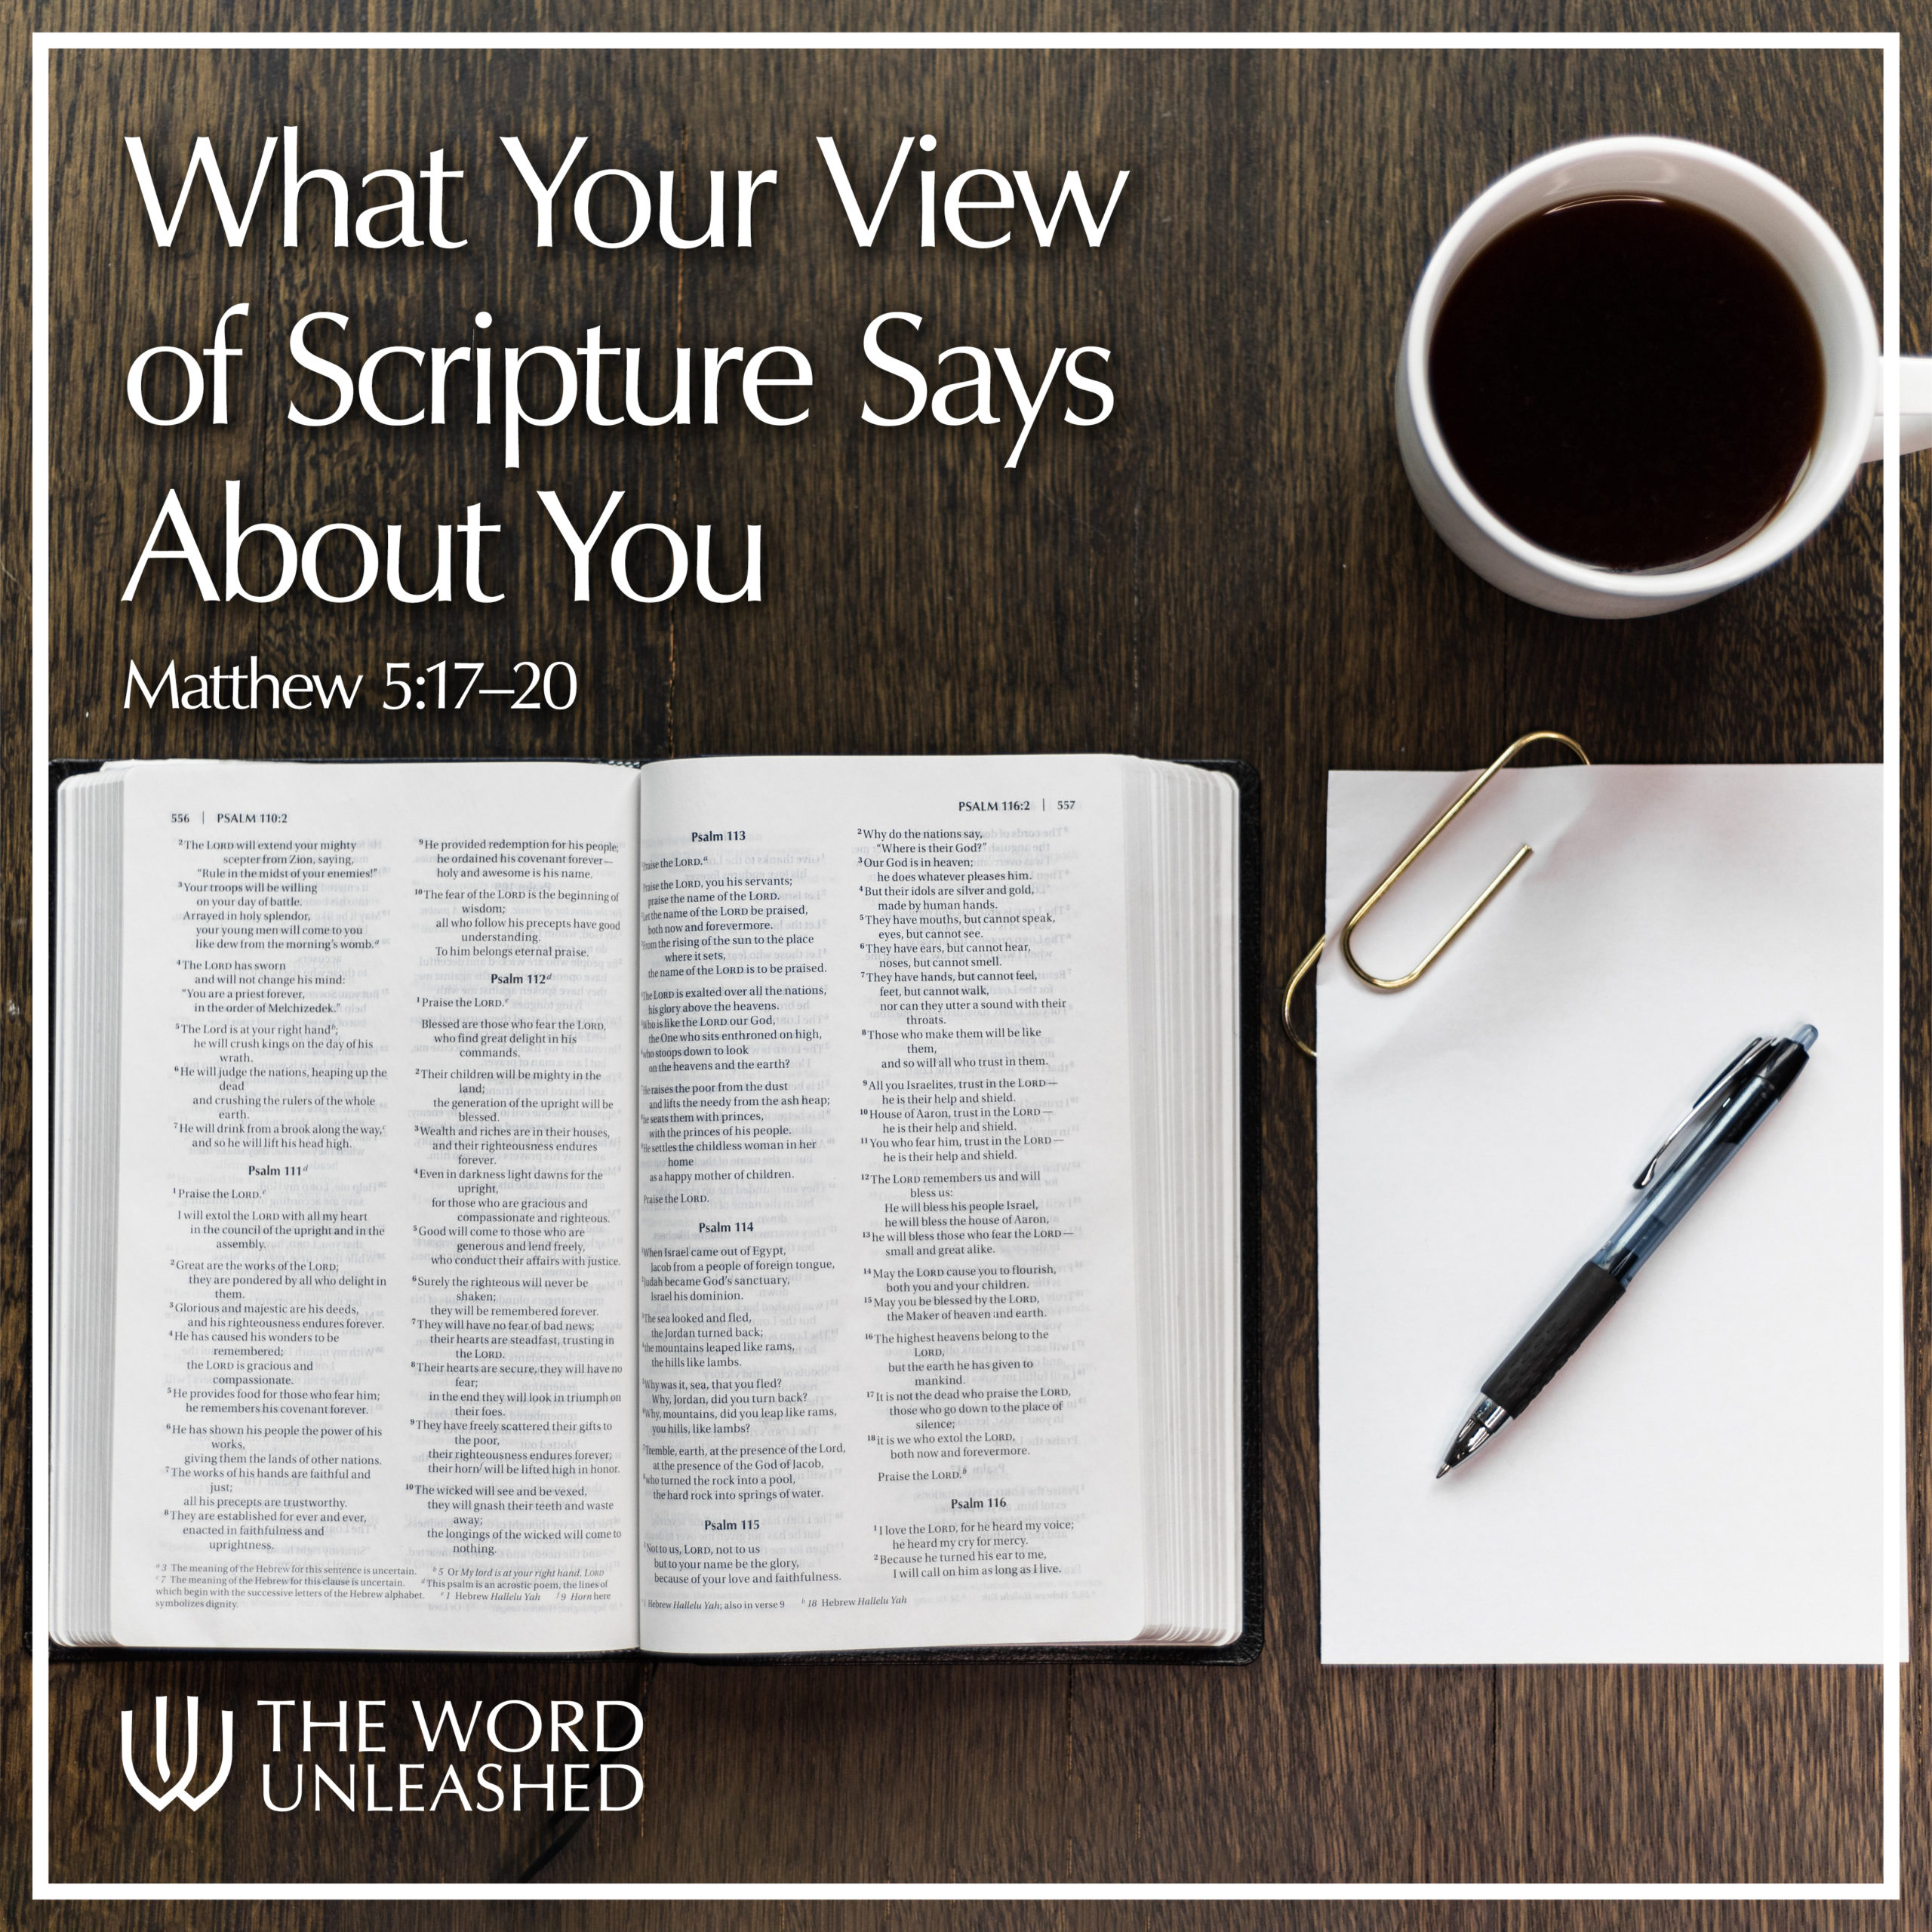 What Your View of Scripture Says About You